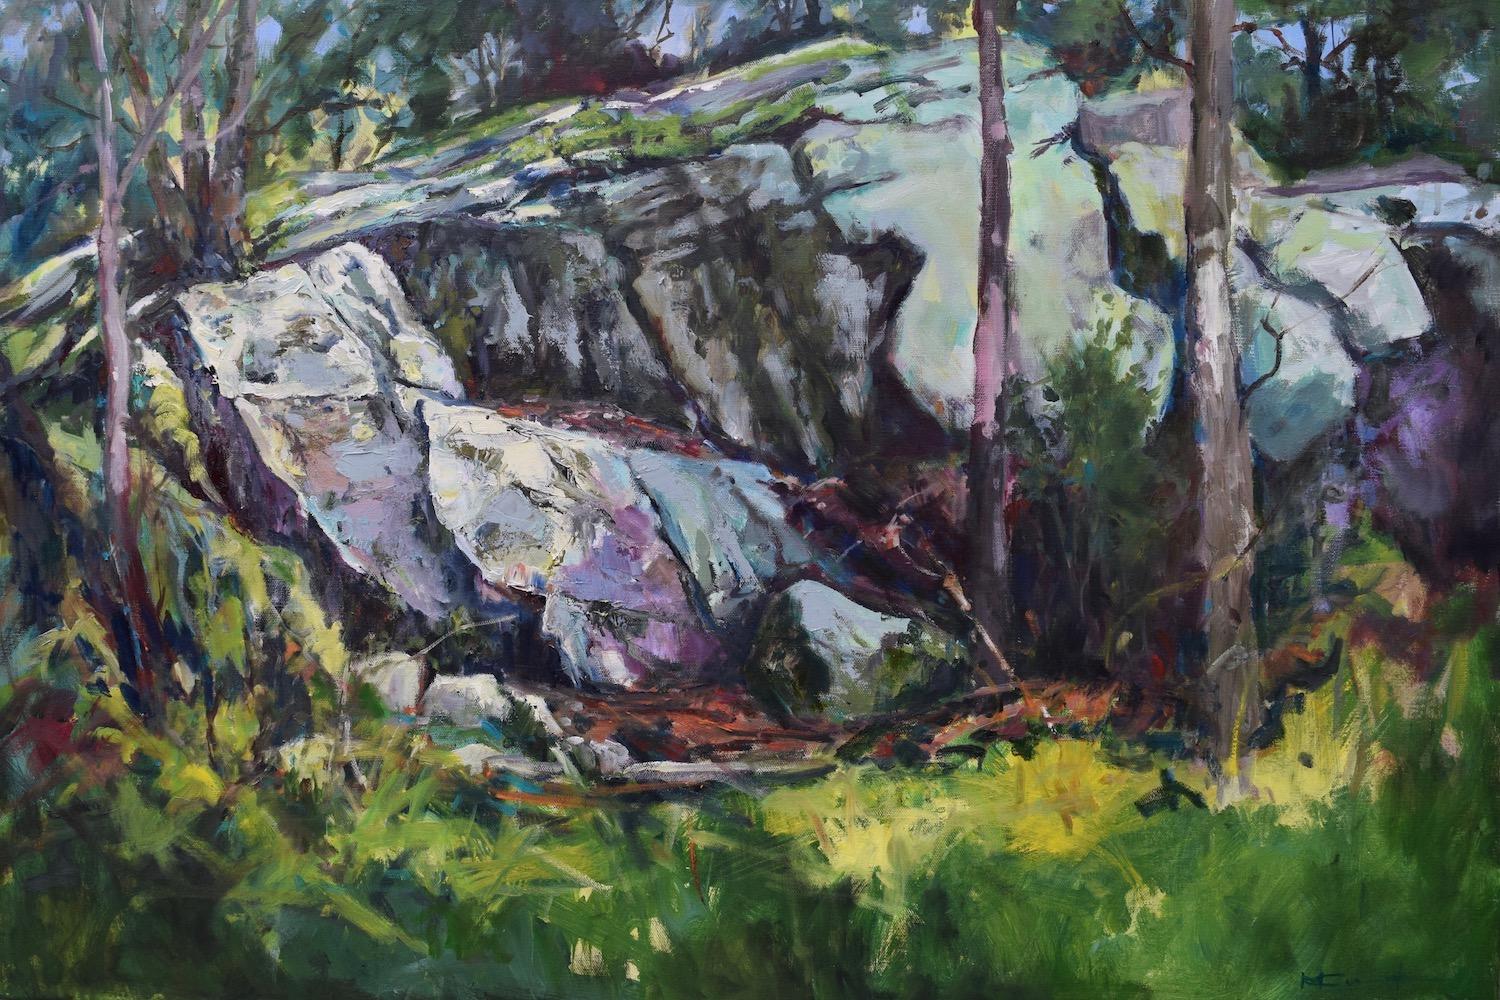 Outcrop, Original Painting - Mixed Media Art by Mickey Cunningham